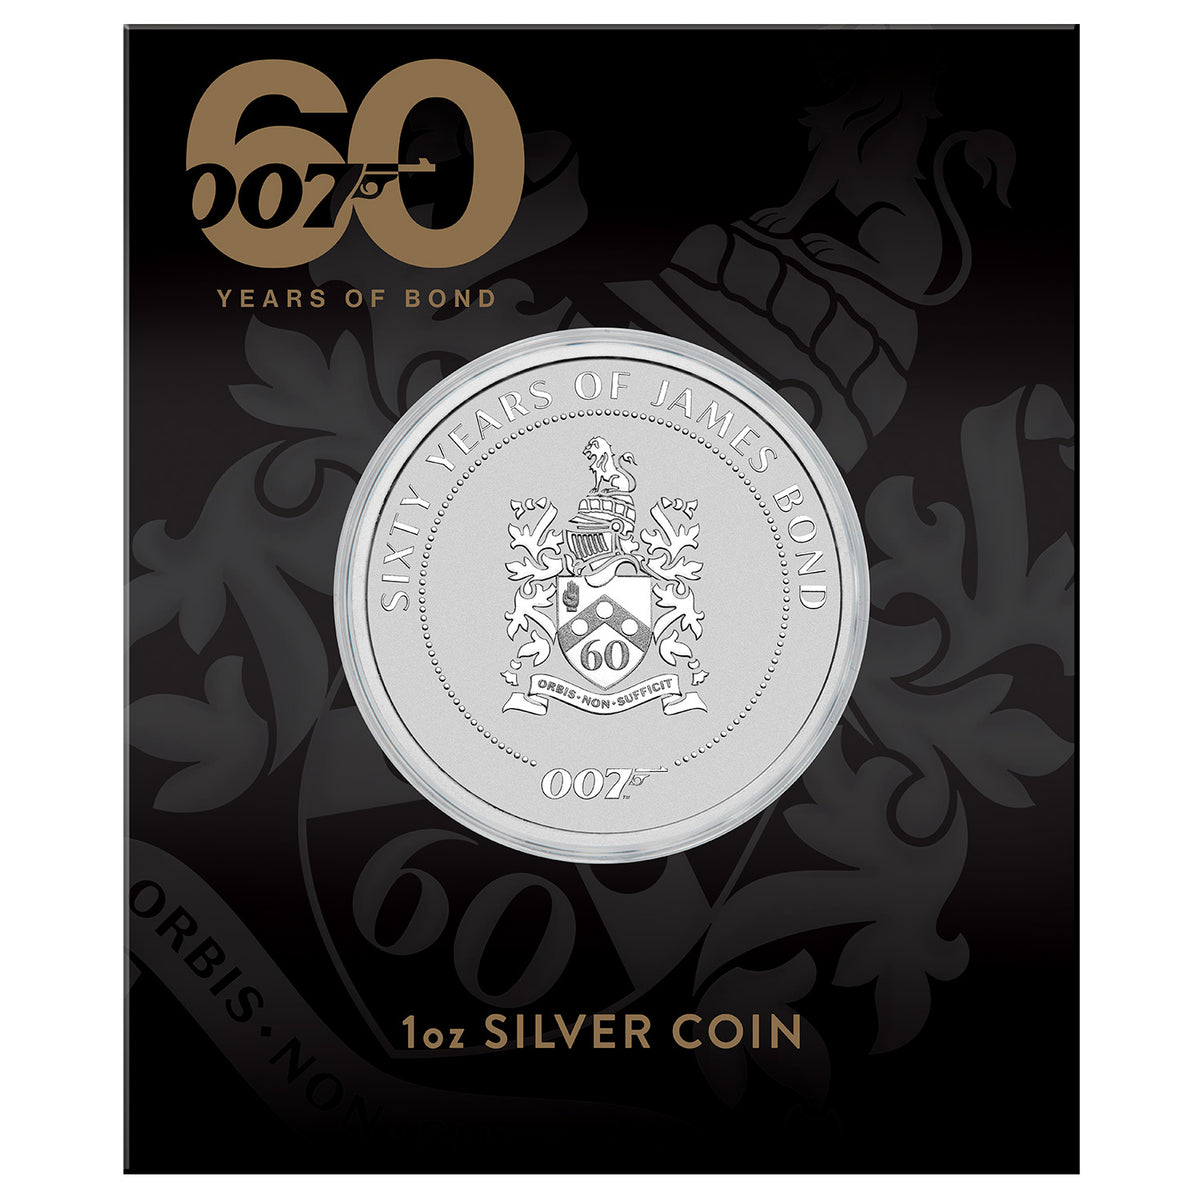 James Bond Family Crest 60th Anniversary 1oz Silver Coin - By The Perth Mint